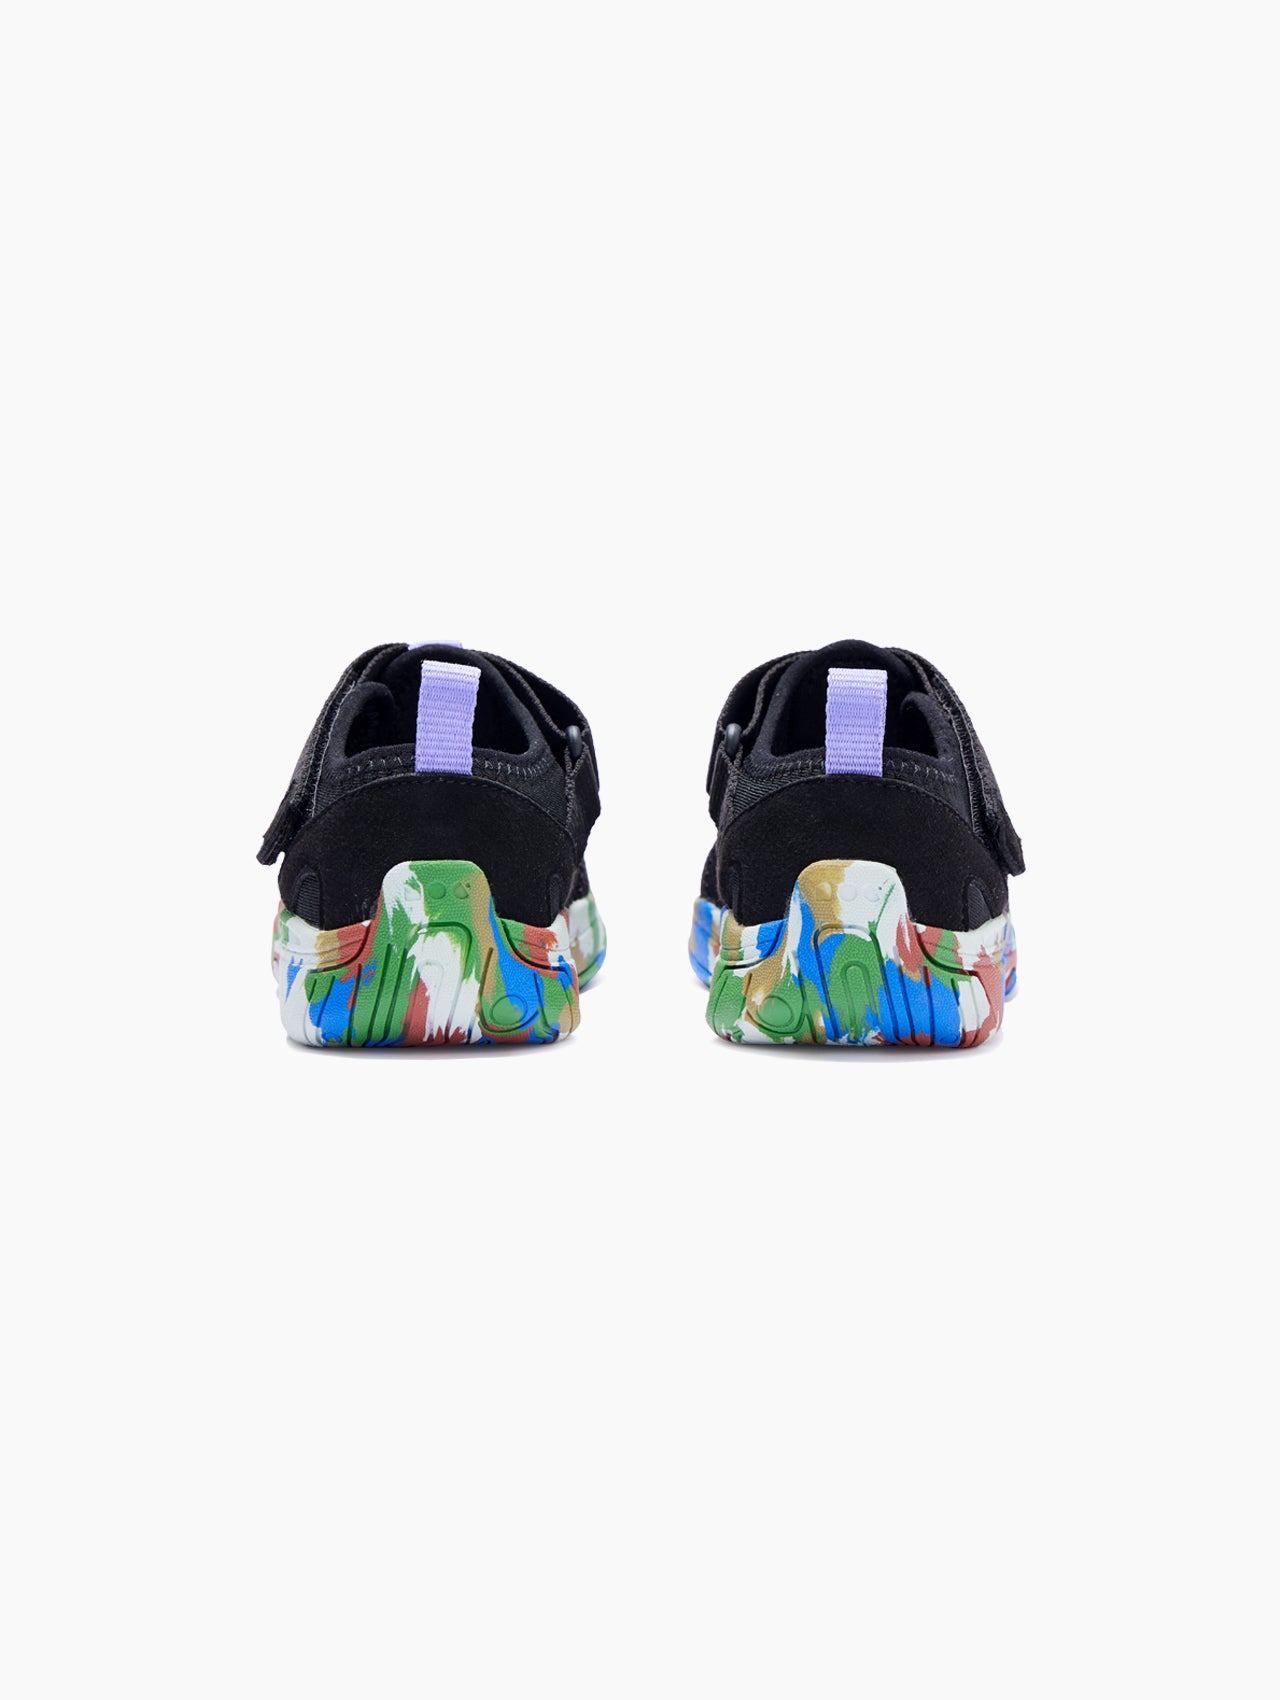 Colorful Family Matching Hiking Free Sandals